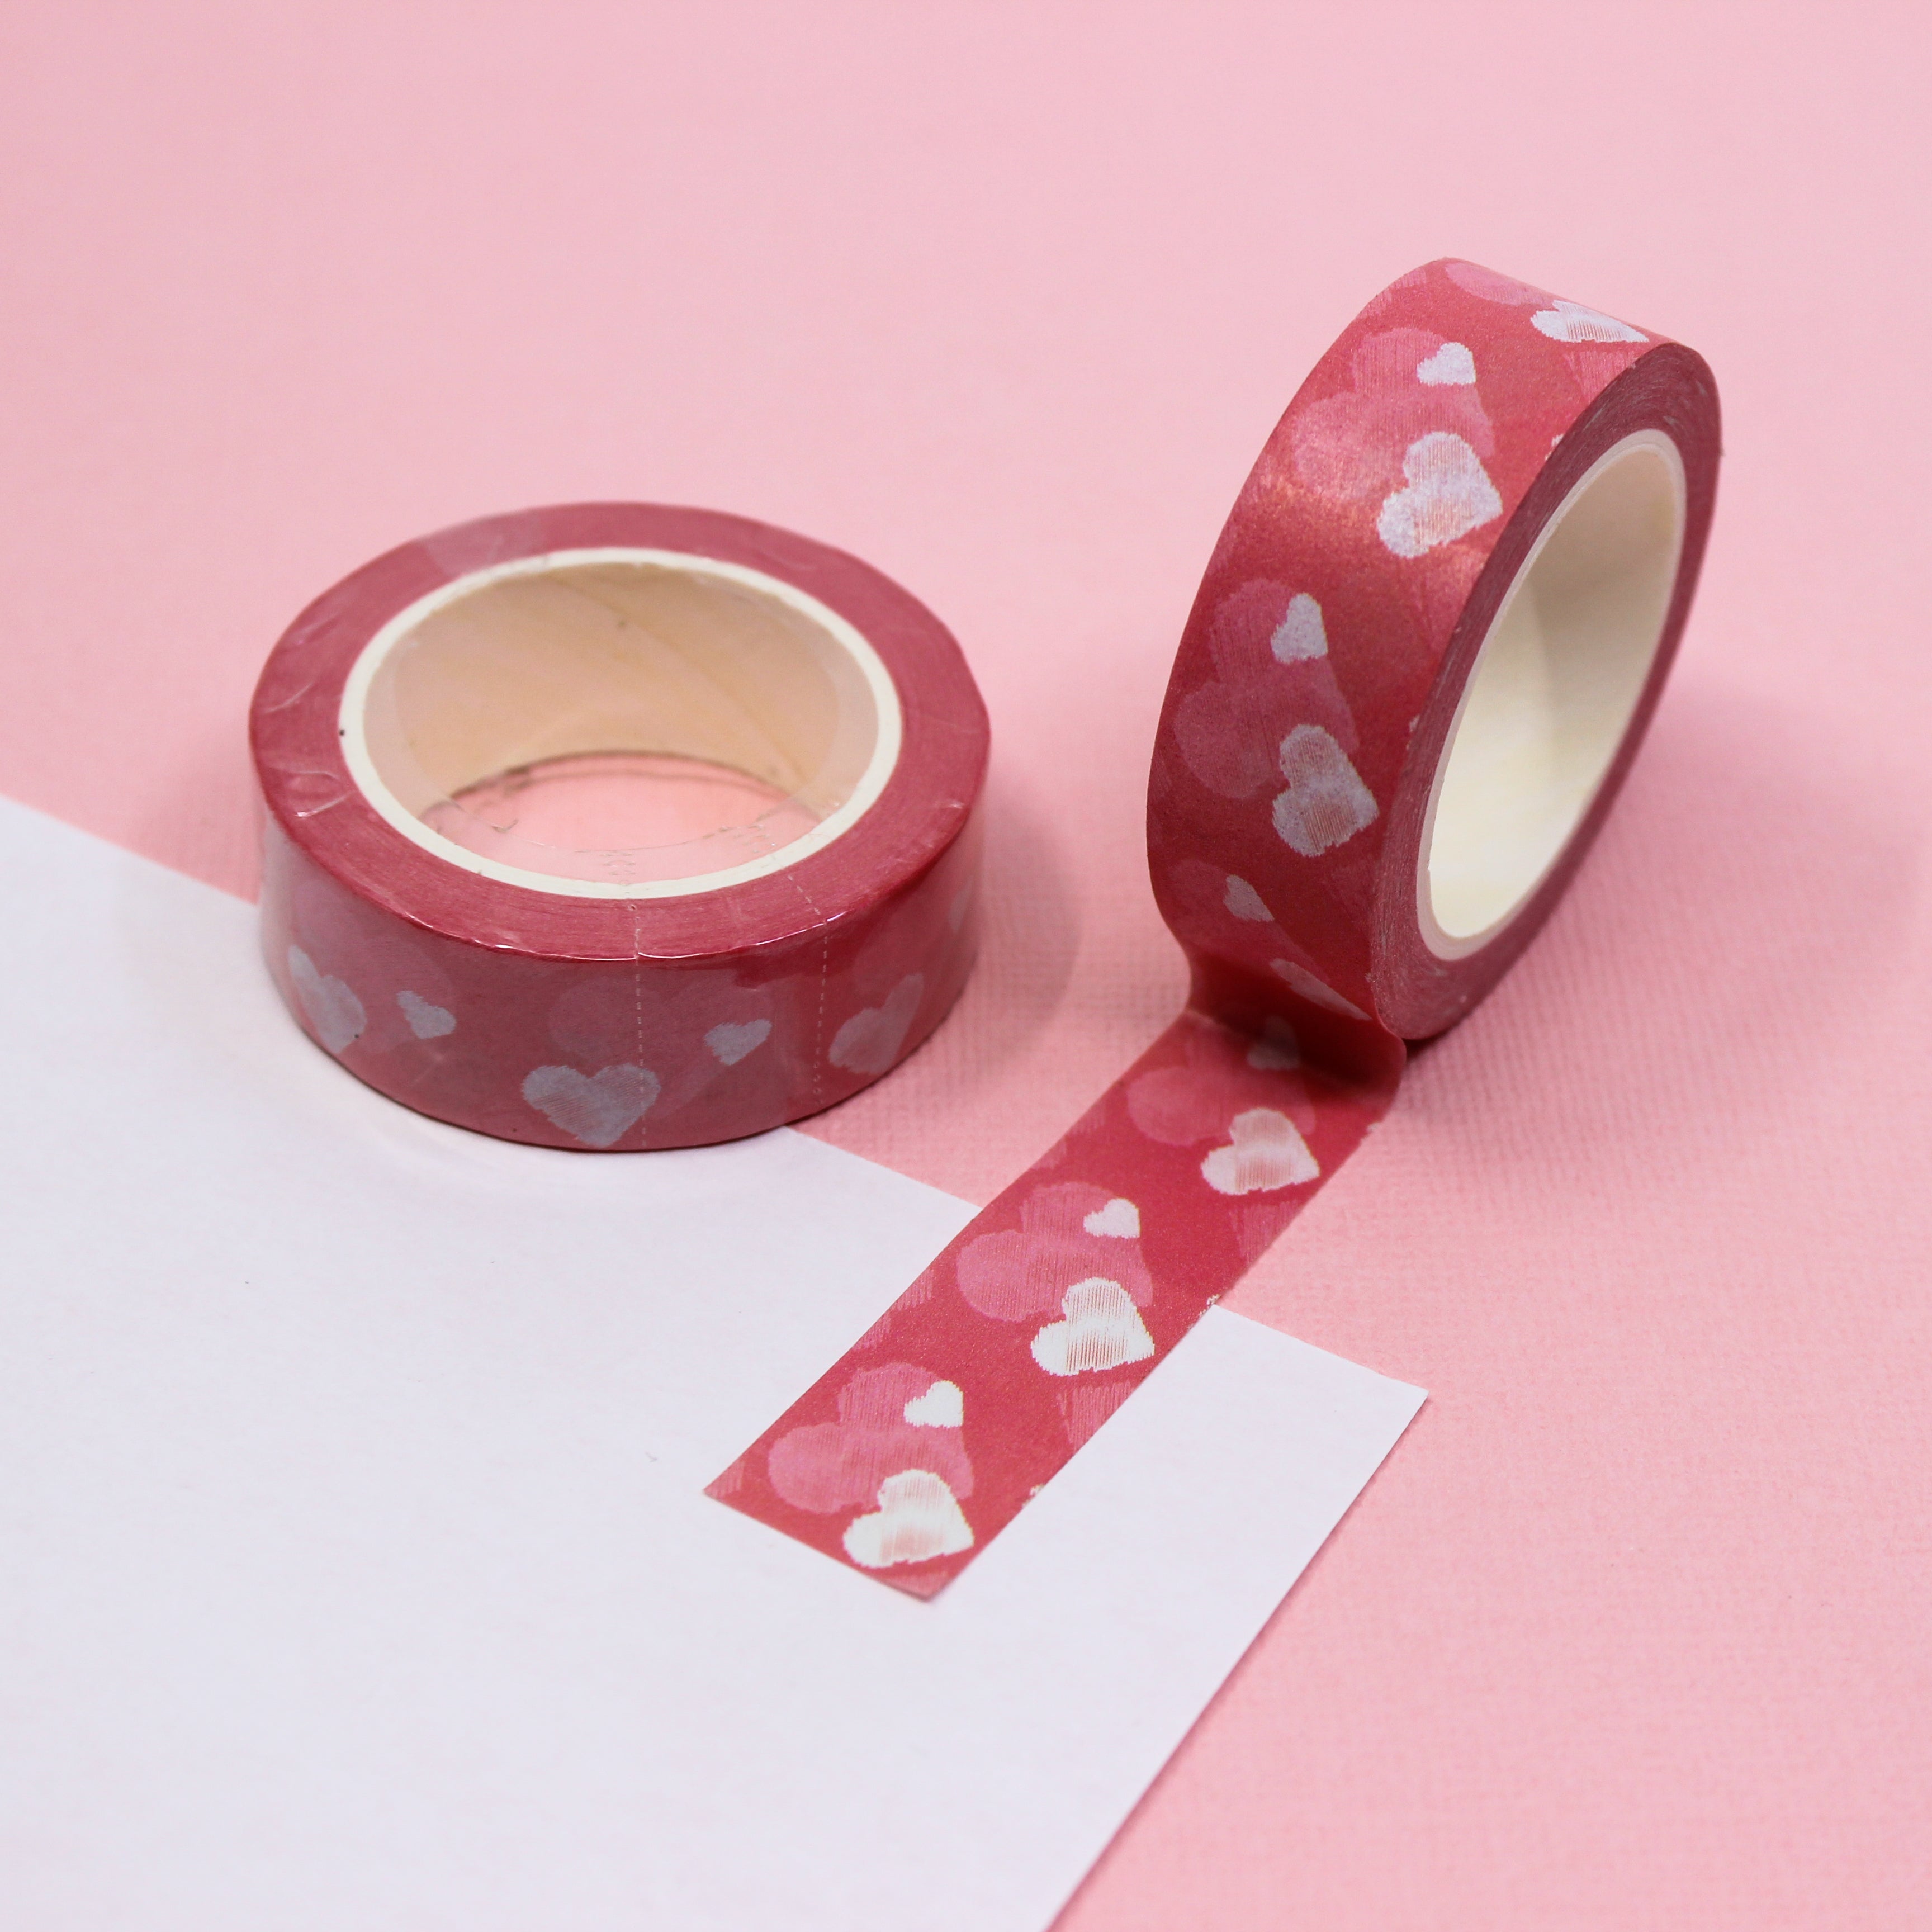 This Layered hearts washi tape beautifully layers pink, red, and white hearts spelling out expressions of love with simply a delicate heart motif. Perfect for adding a romantic touch to your greeting cards, scrapbooks, or gift wrapping, this washi tape exudes warmth and sentiment. This tape is sold at BBB Supplies Craft Shop.